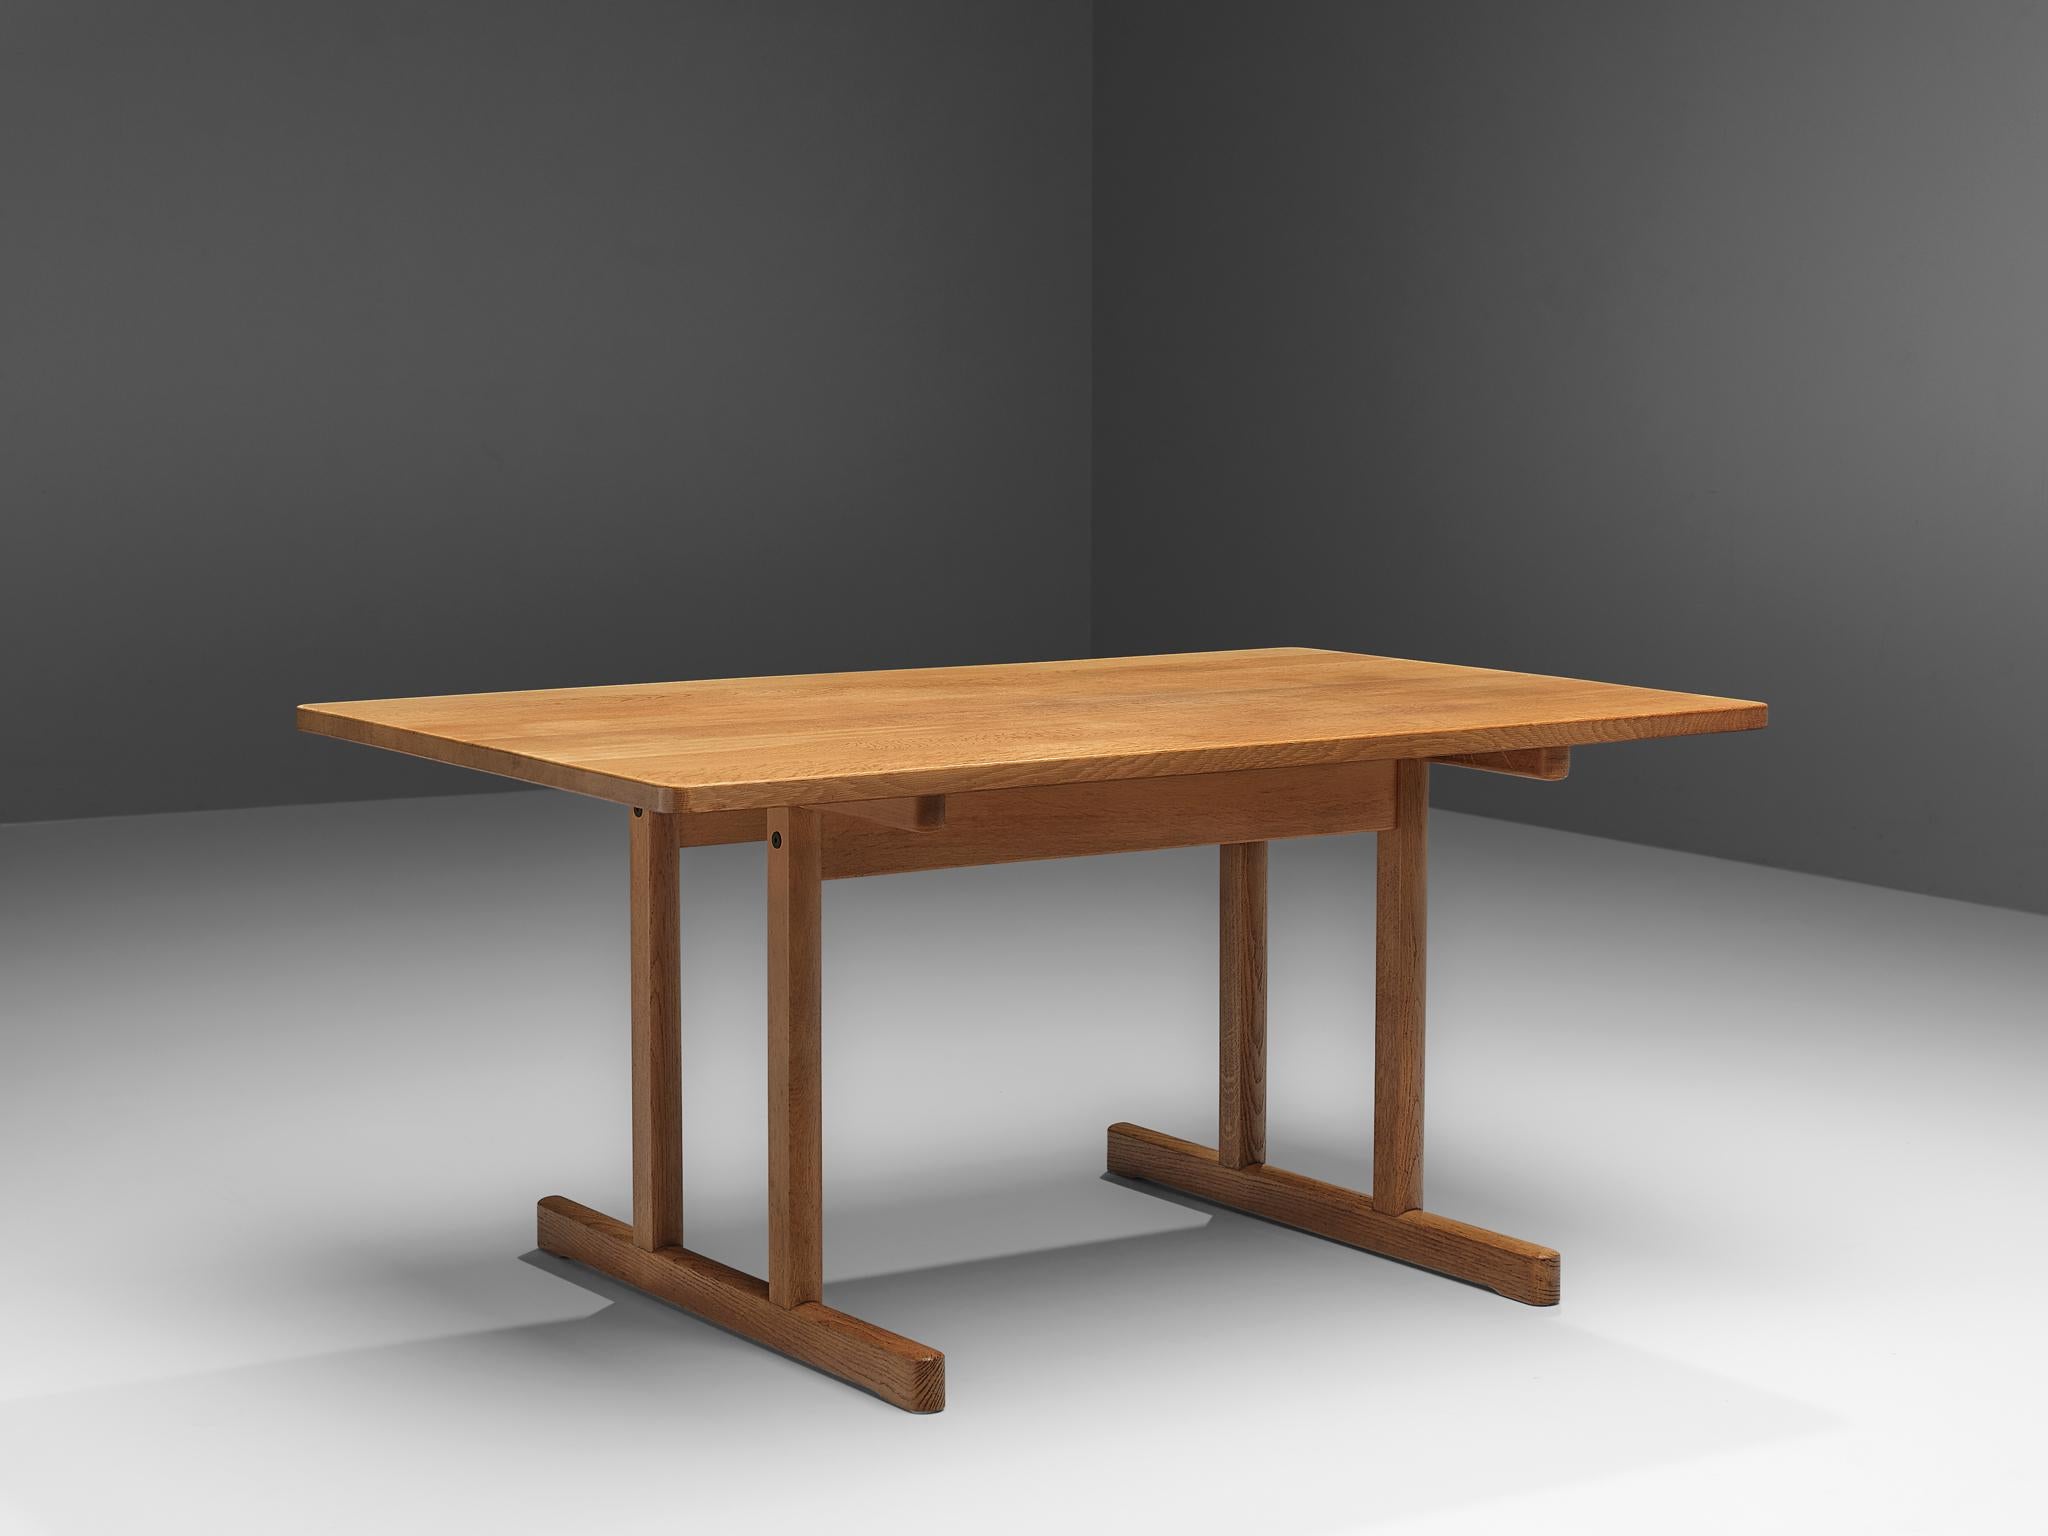 Børge Mogensen for Fredericia Stolefabrik, dining table, model 6289, oak, Denmark, 1966

Børge Mogensen designed this dining table in 1966 for Fredericia Stolefabrik. The table is made out of solid oak. The rectangular tabletop is hold by a pair of